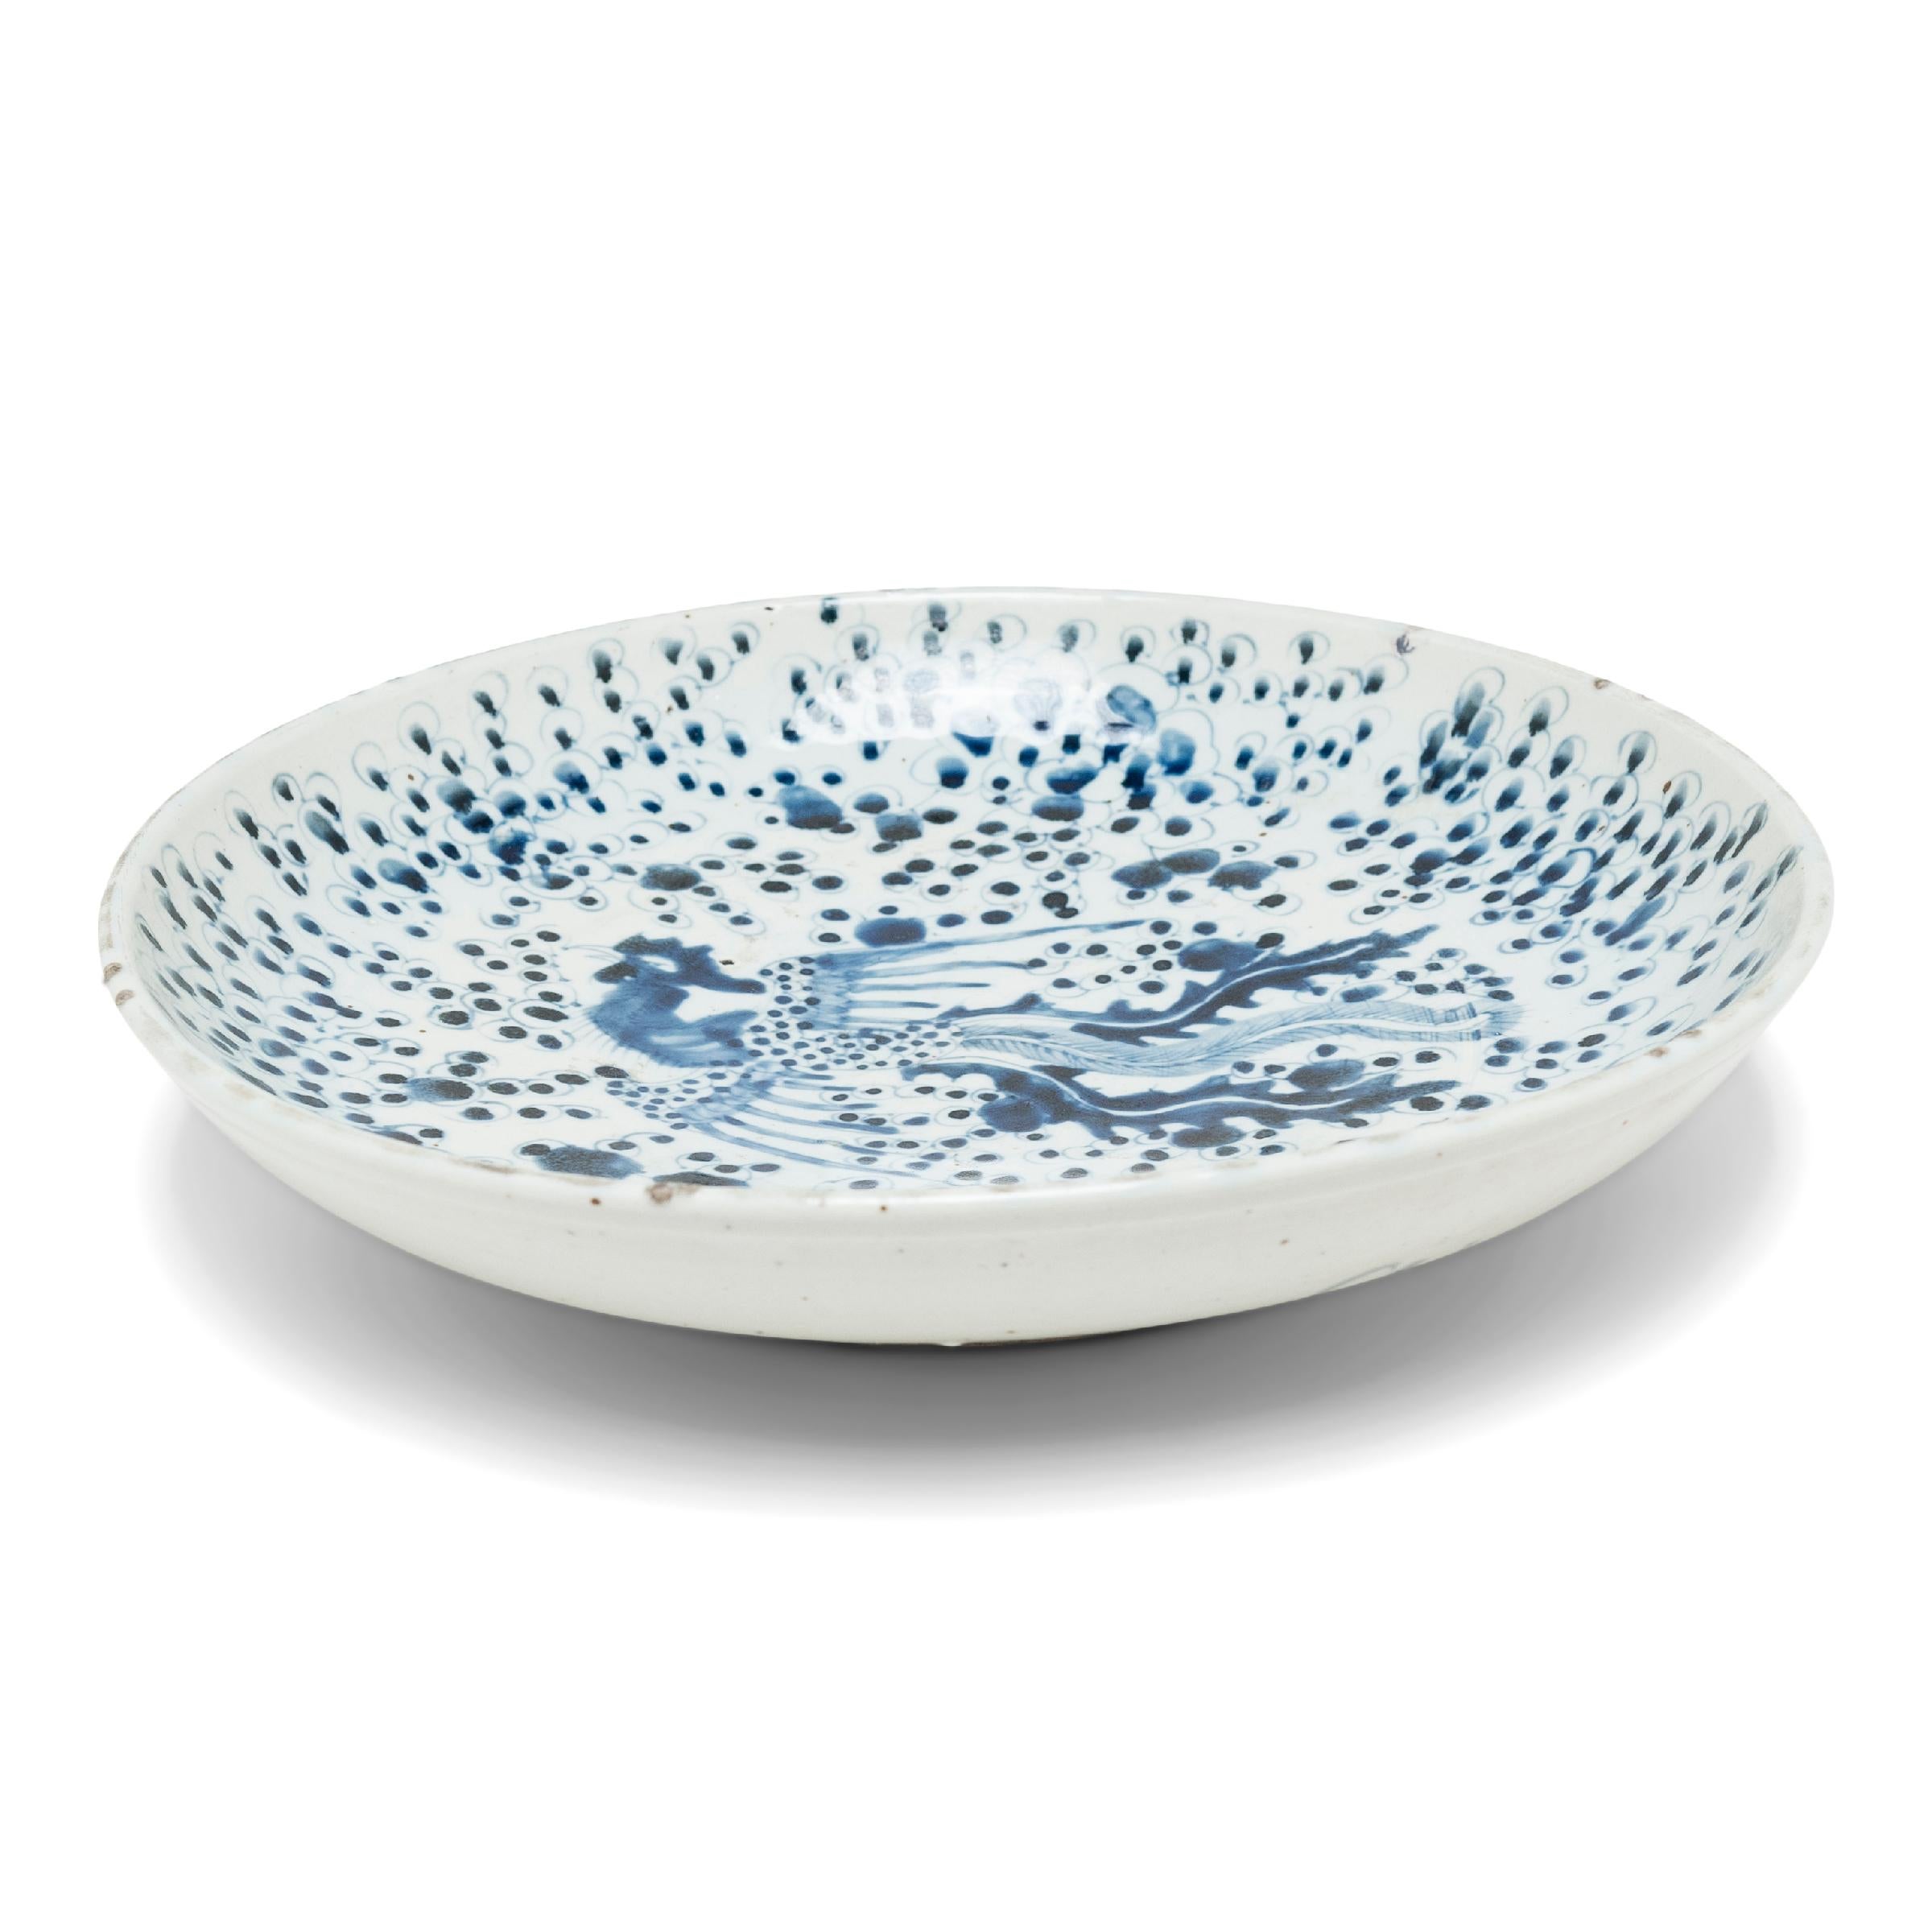 An elevated example of Chinese blue-and-white porcelain, this large footed dish charms with dark, cobalt-blue brushwork atop a cool white field. The plate is decorated with an all-over fish-roe pattern, resembling clouds swirling around the central